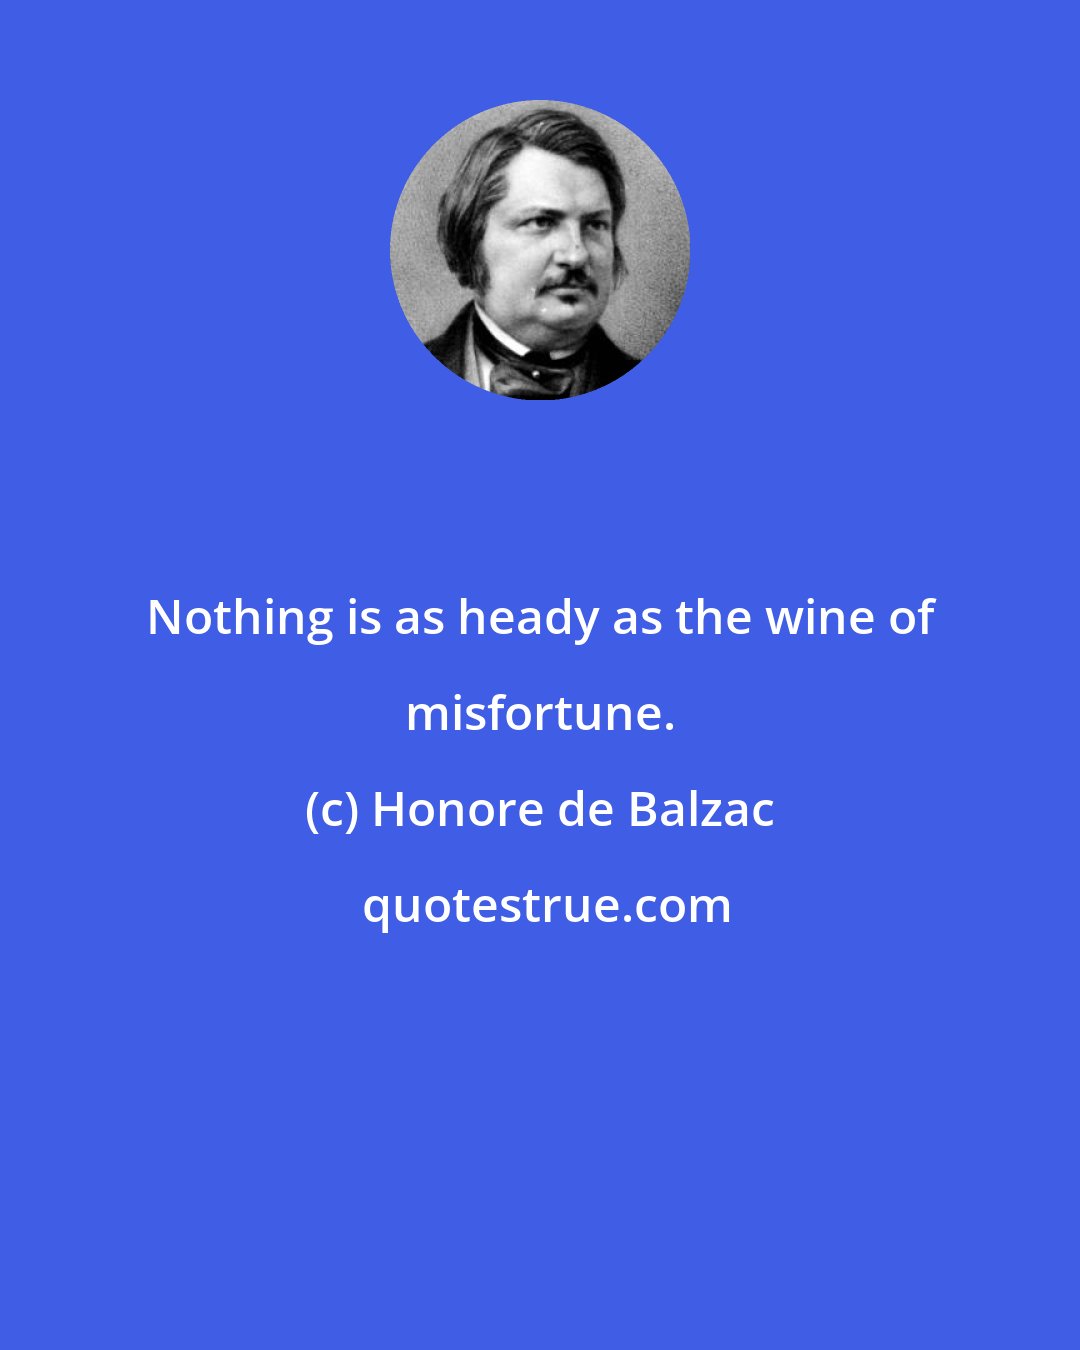 Honore de Balzac: Nothing is as heady as the wine of misfortune.